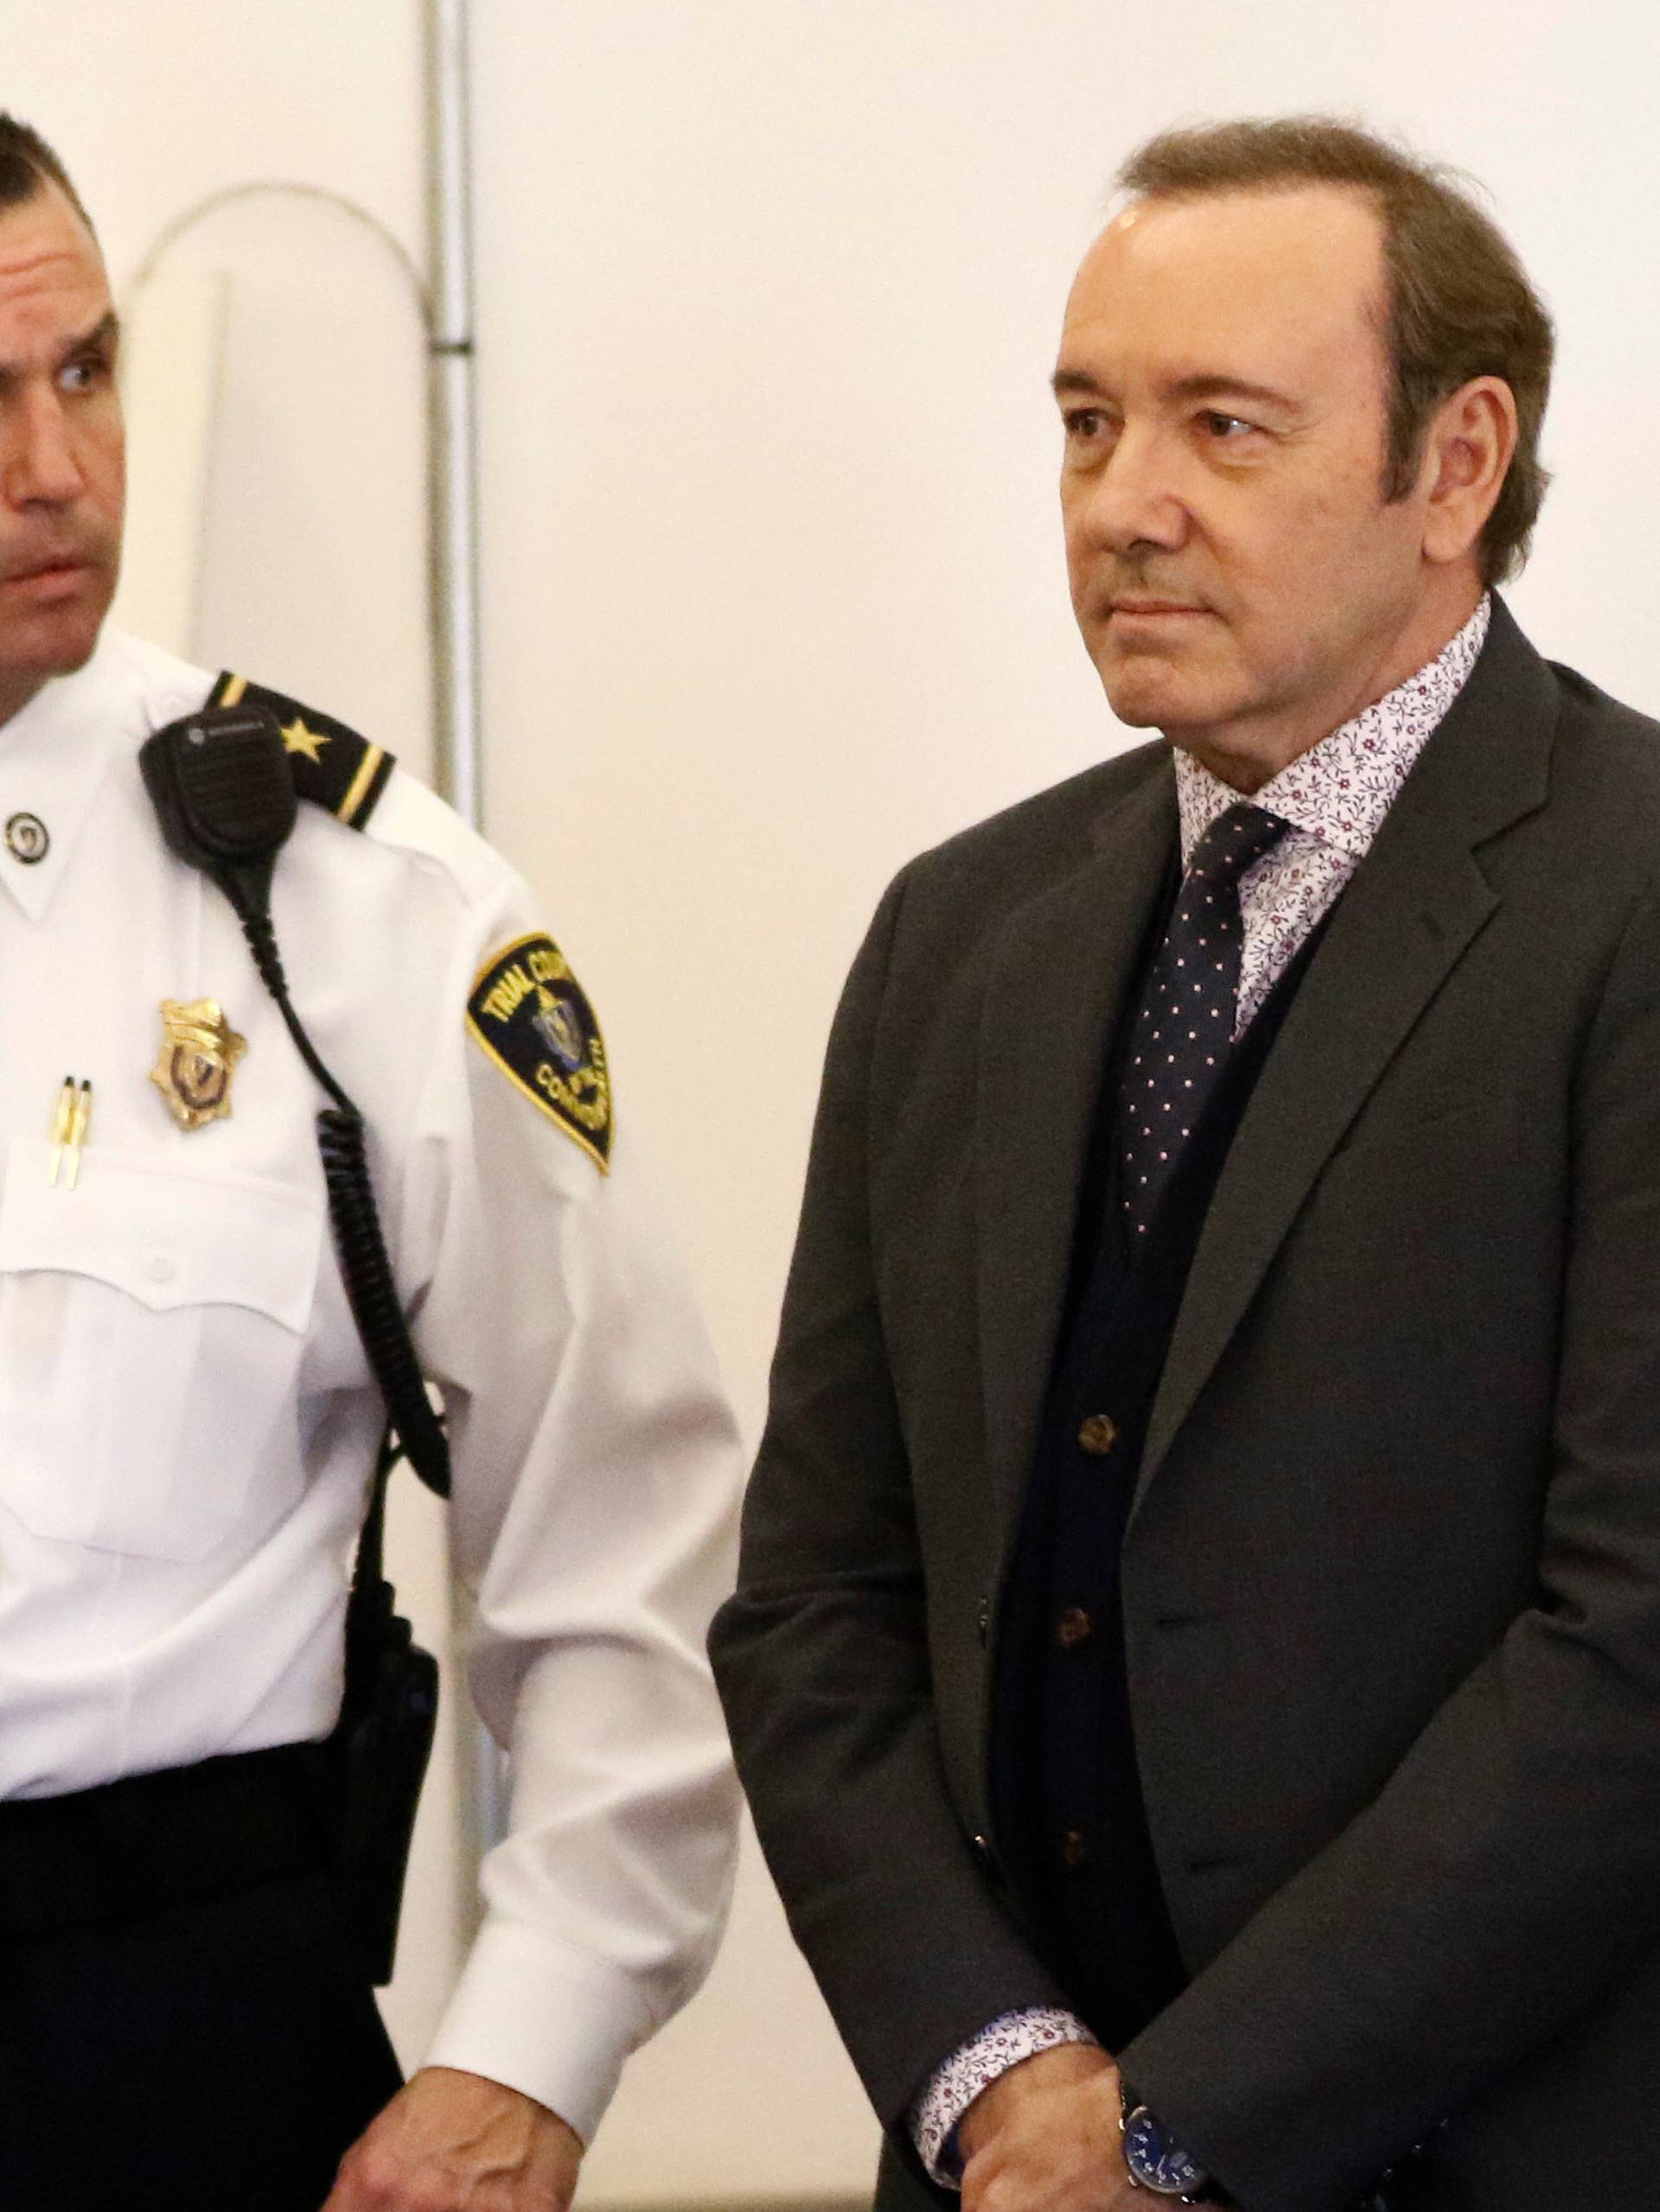 Actor Kevin Spacey is arraigned on a sexual assault charge at Nantucket District Court in Nantucket